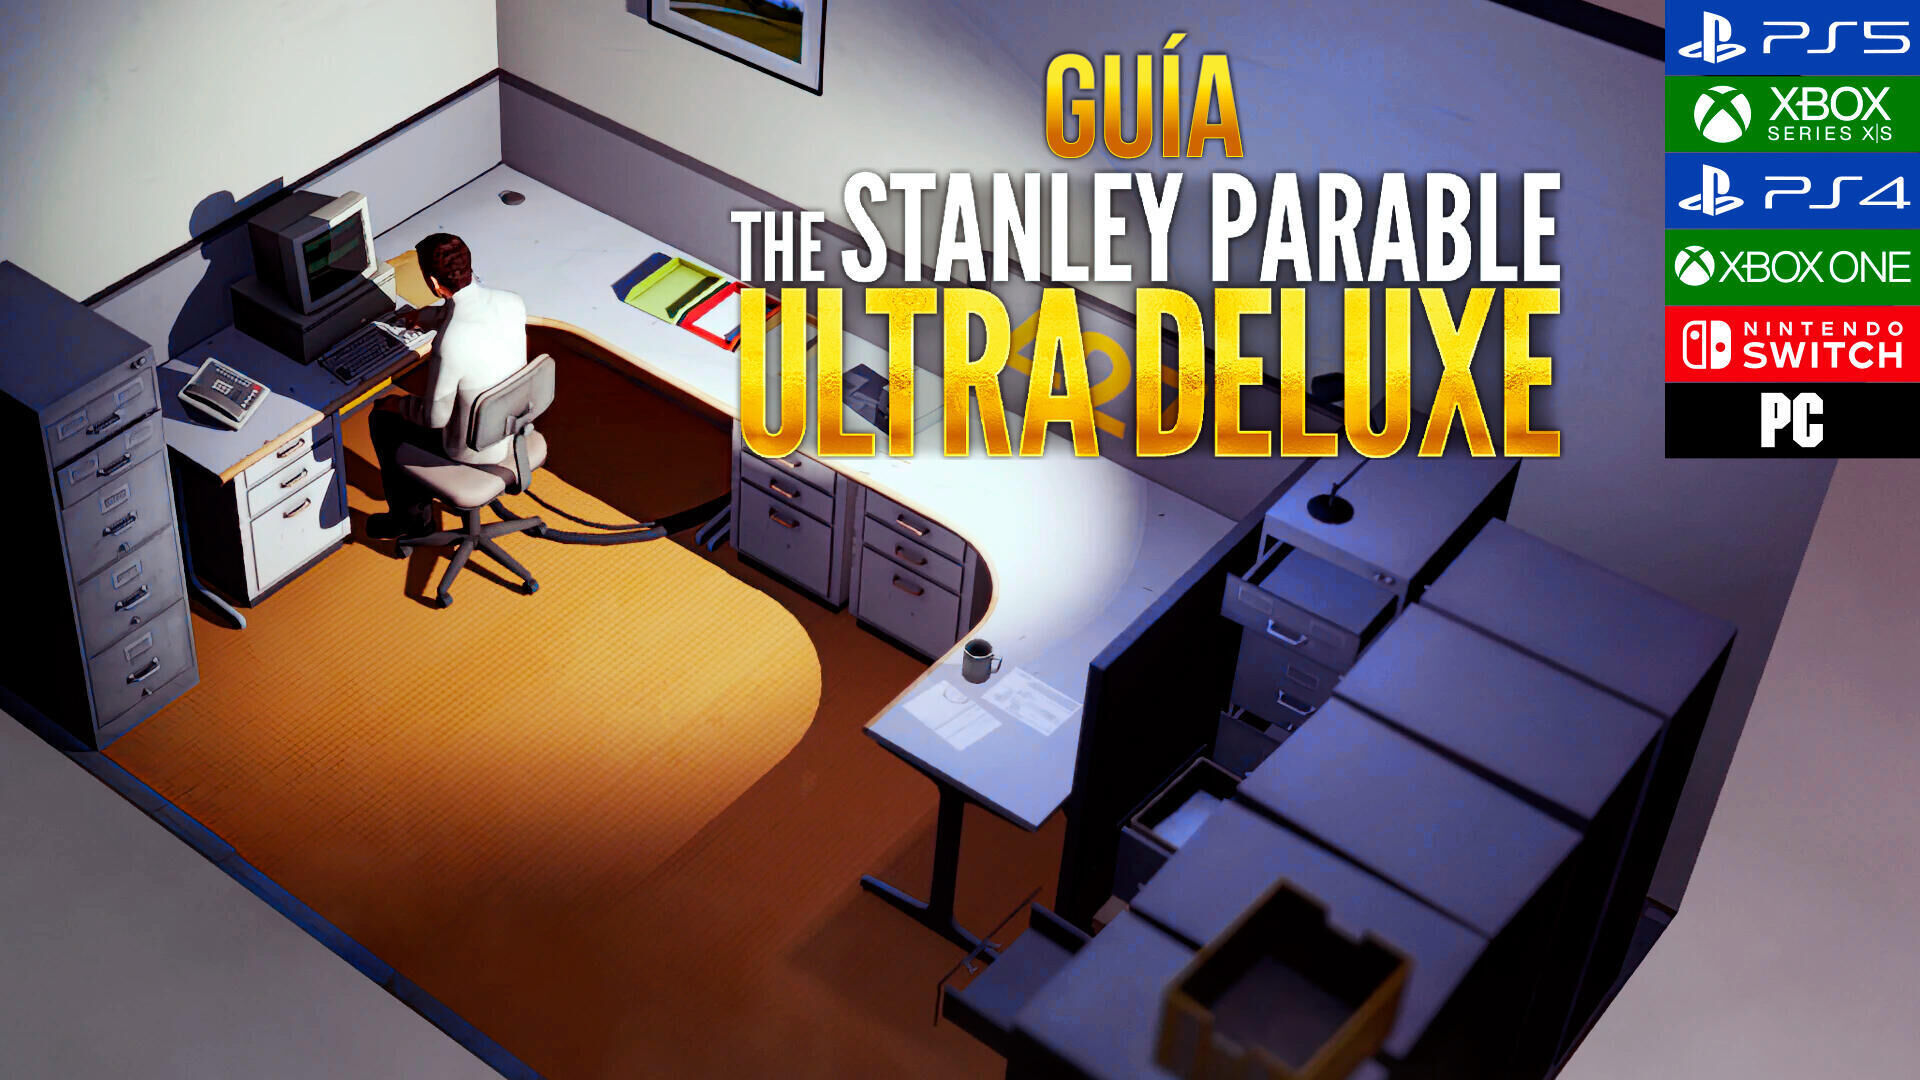 Stanley ultra deluxe. Stanley Parable Ultra Deluxe Стэнли. Стэнли из the Stanley Parable. The Stanley Parable: Ultra Deluxe. Stanley Parable Deluxe Edition.